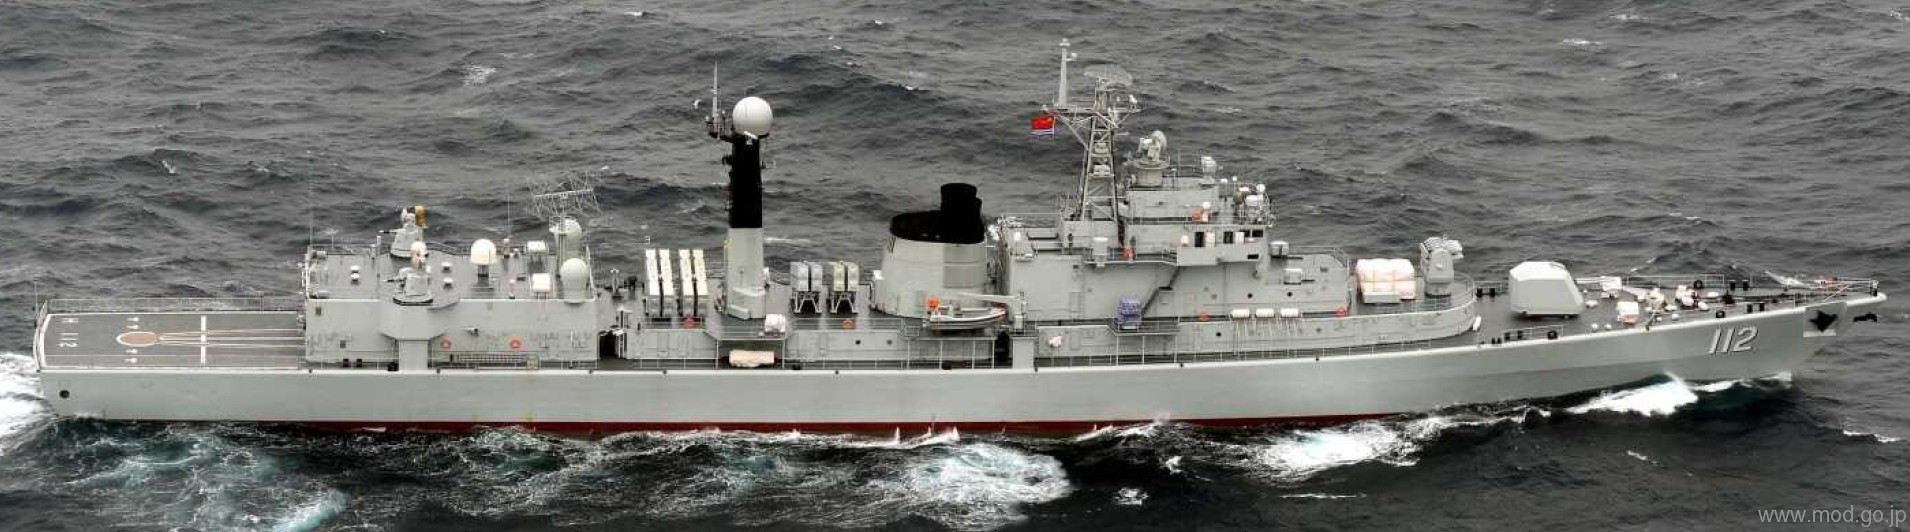 ddg-112 plans harbin type 052 luhu class guided missile destroyer china peoples liberation army navy plan 08